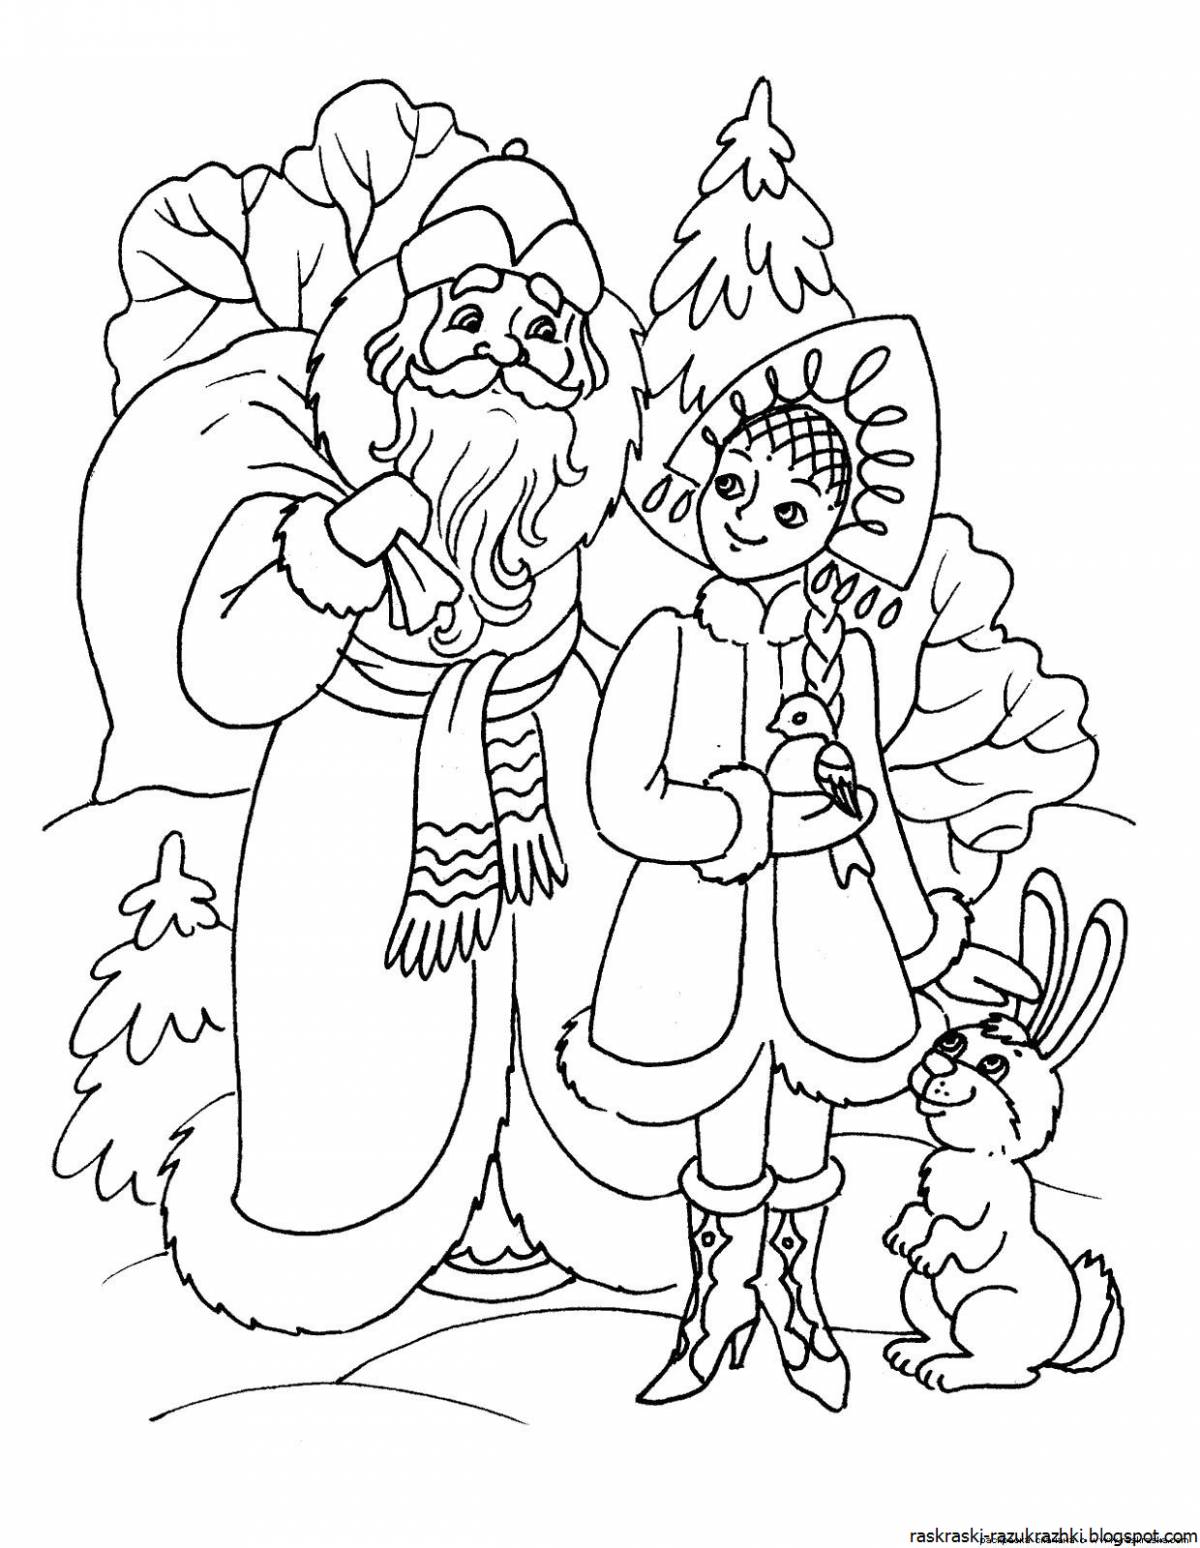 Santa Claus and Snow Maiden for kids #10